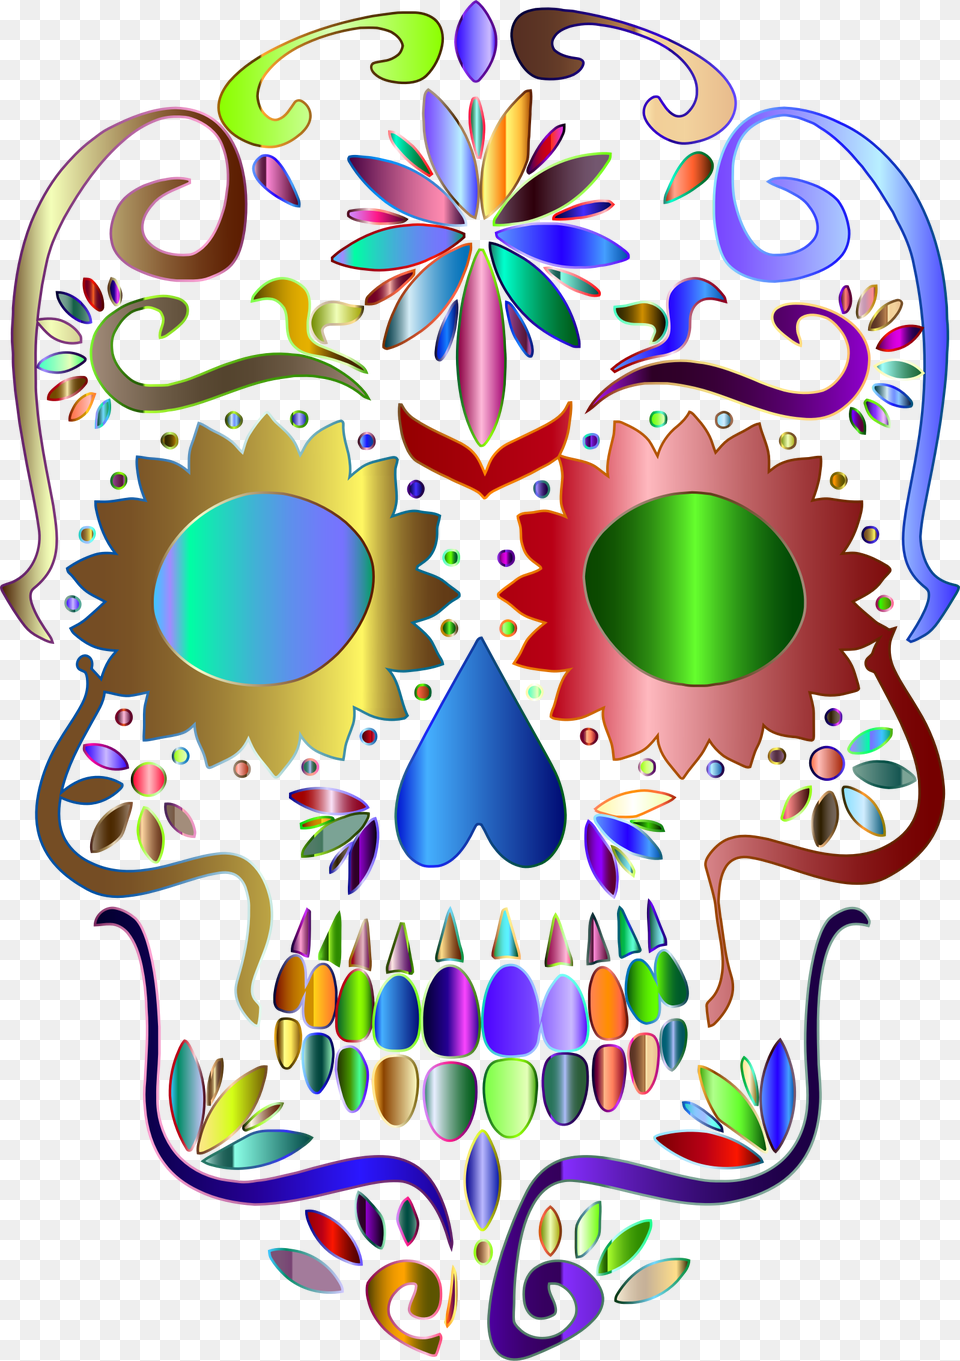 Prismatic Sugar Skull Silhouette 4 No Background Clip, Art, Graphics, Pattern, Crowd Png